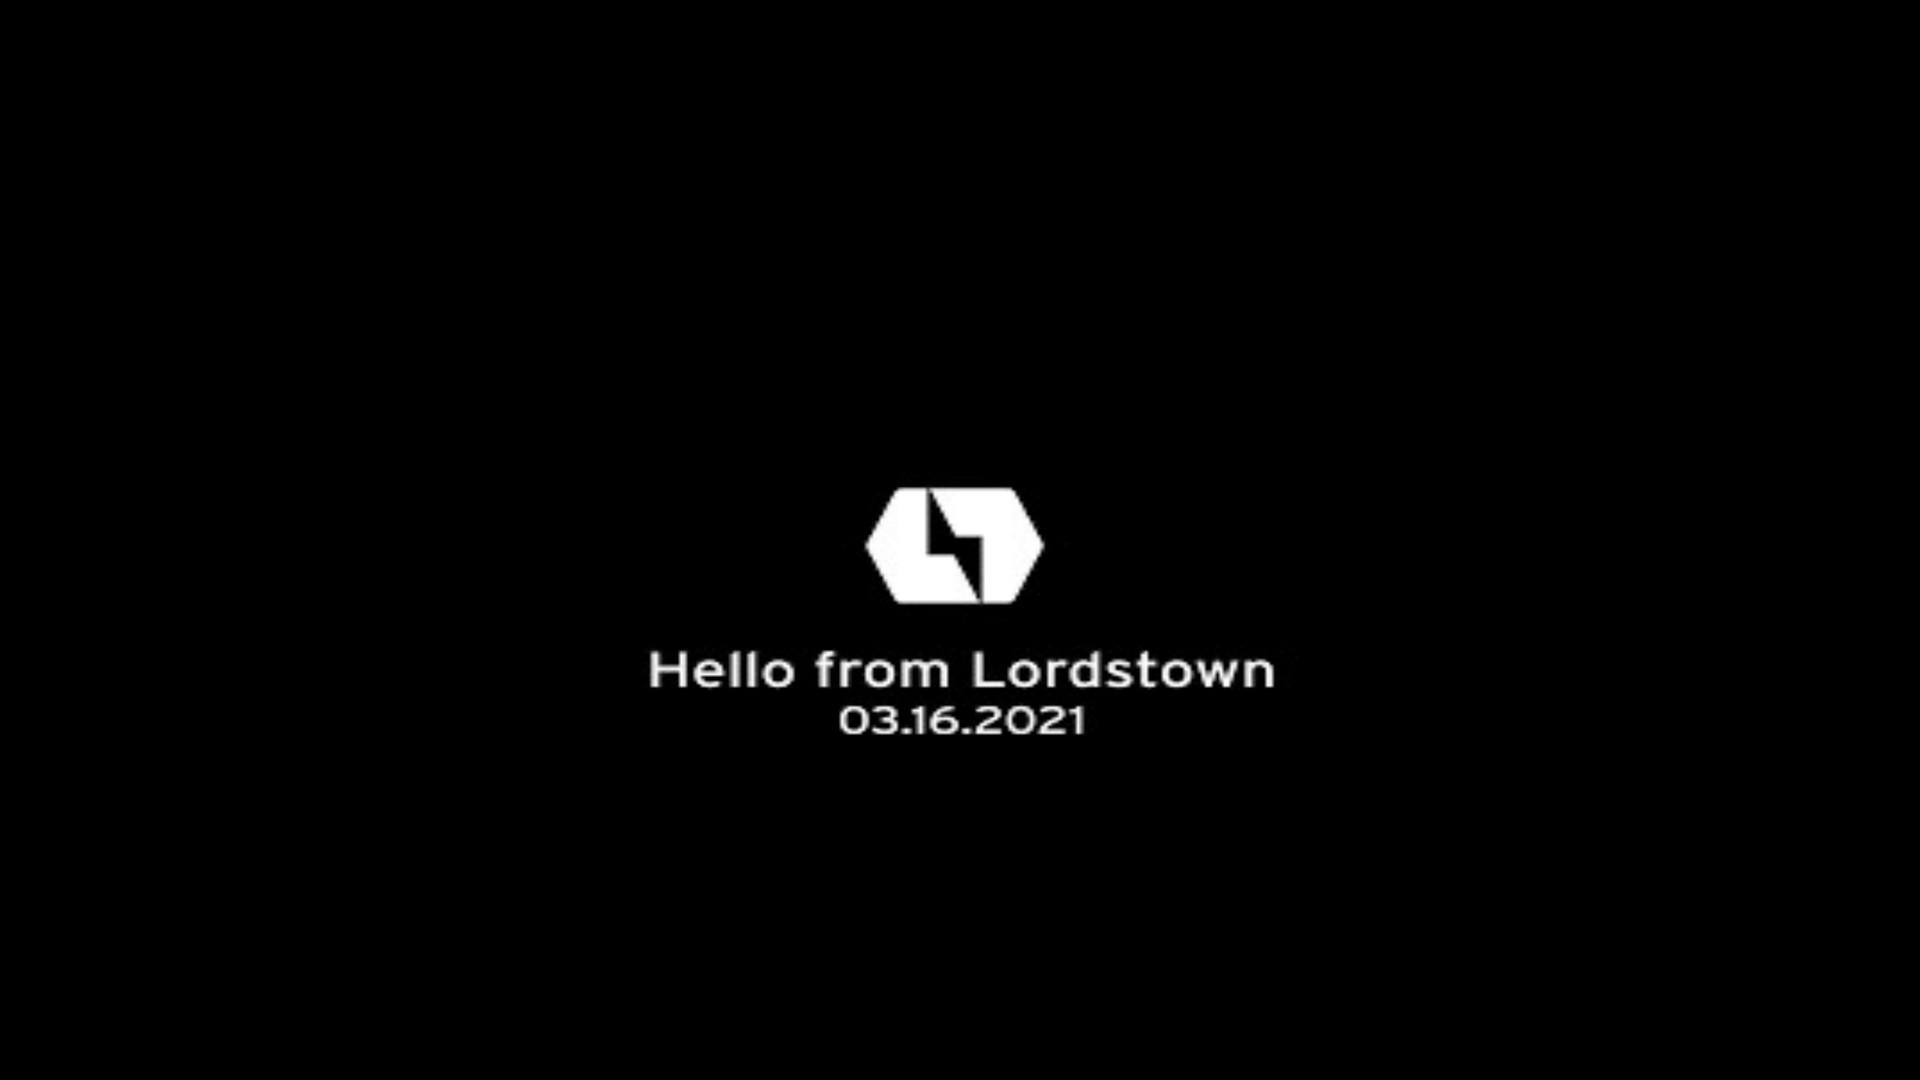 hello from ere | Lordstown Motors